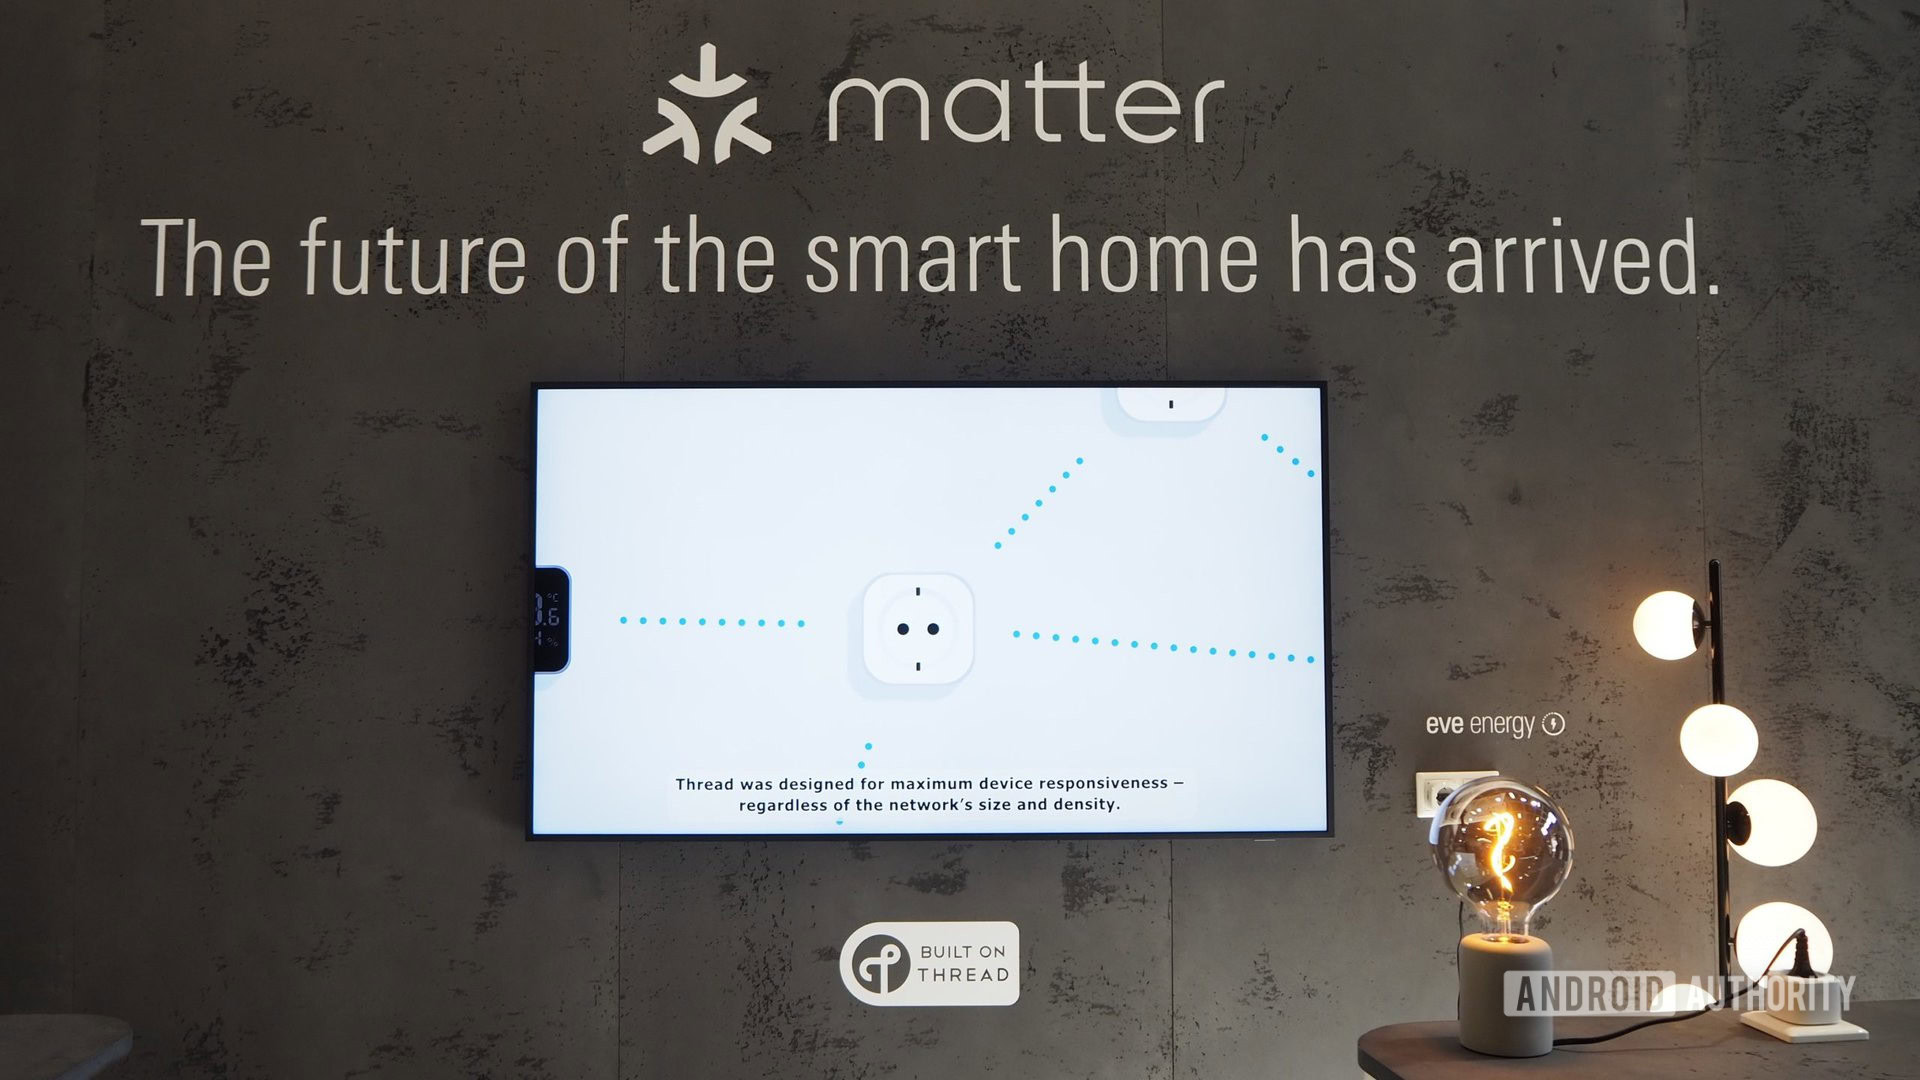 Eve showed us the Matter smart home protocol in action for the first time